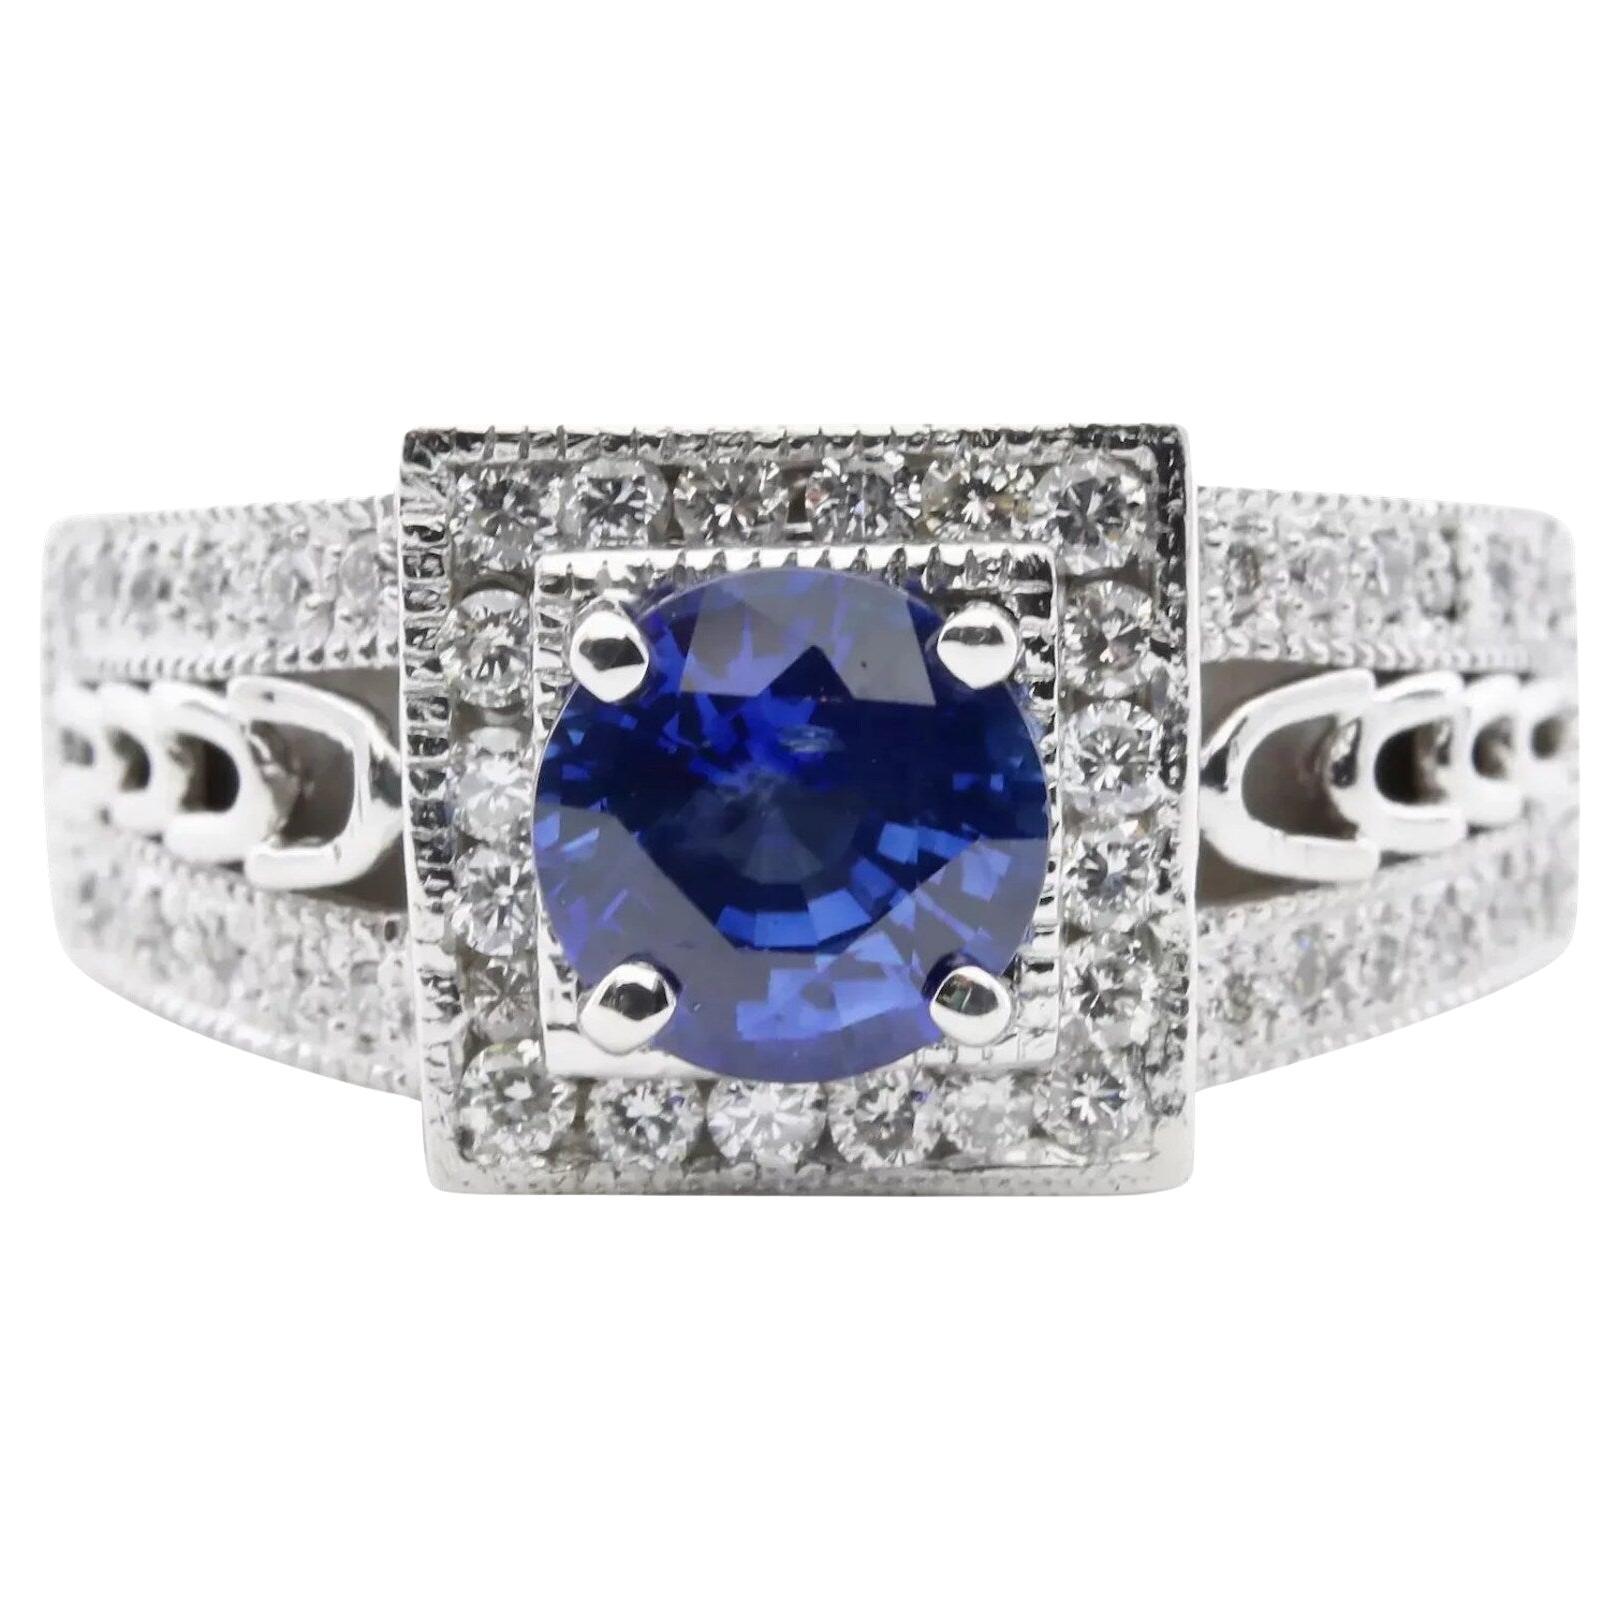 Contemporary Rich Blue 1.68ctw Sapphire & Diamond Ring in 14K White Gold